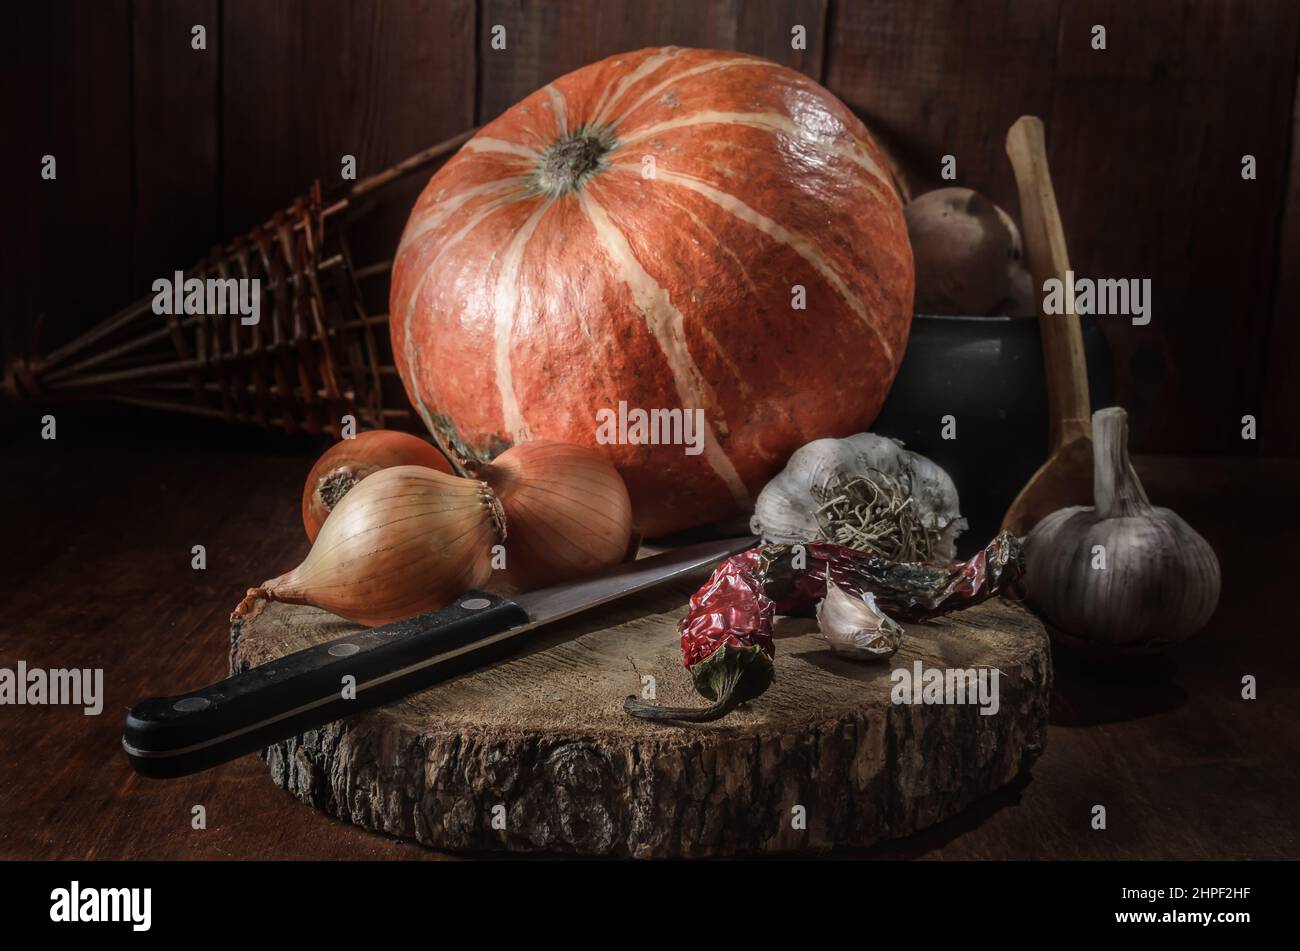 Pumpkin and other vegetables on a dark wooden background Stock Photo